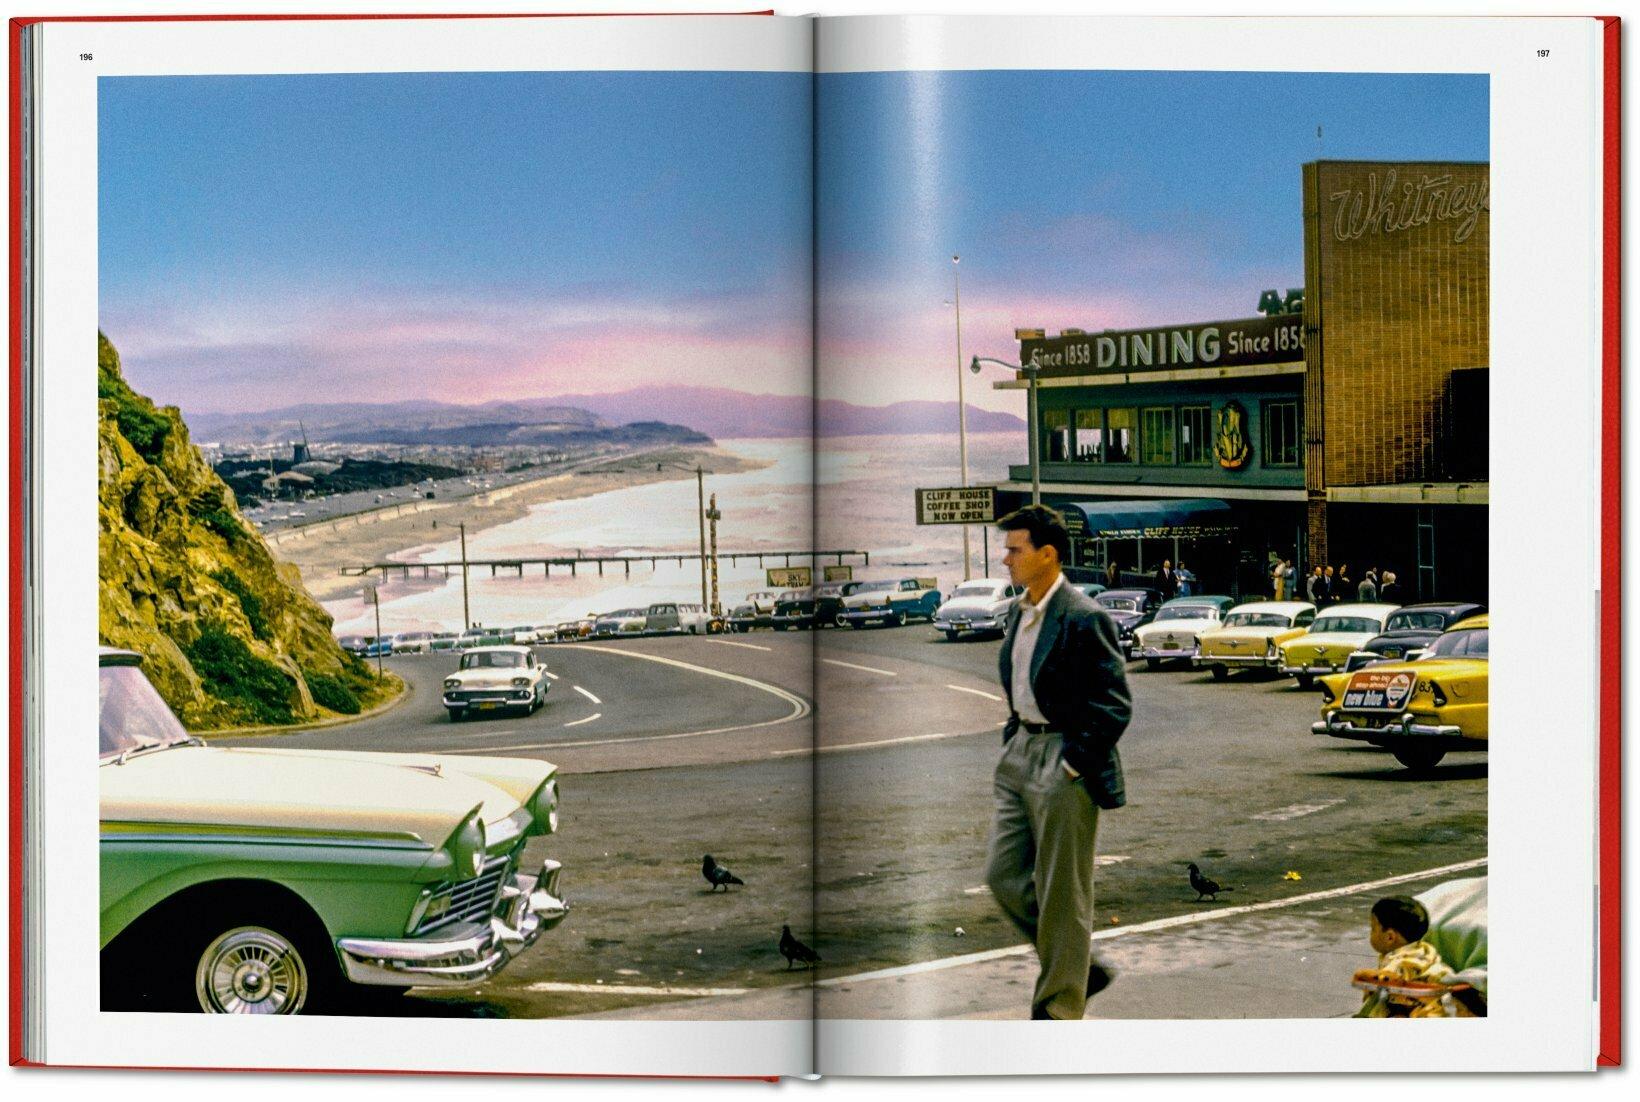 An epic pictorial history of the City by the Bay
Starting with an early picture of a gang of badass gold prospectors who put this beautiful Northern California city on the map, this ambitious and immersive photographic history of San Francisco takes